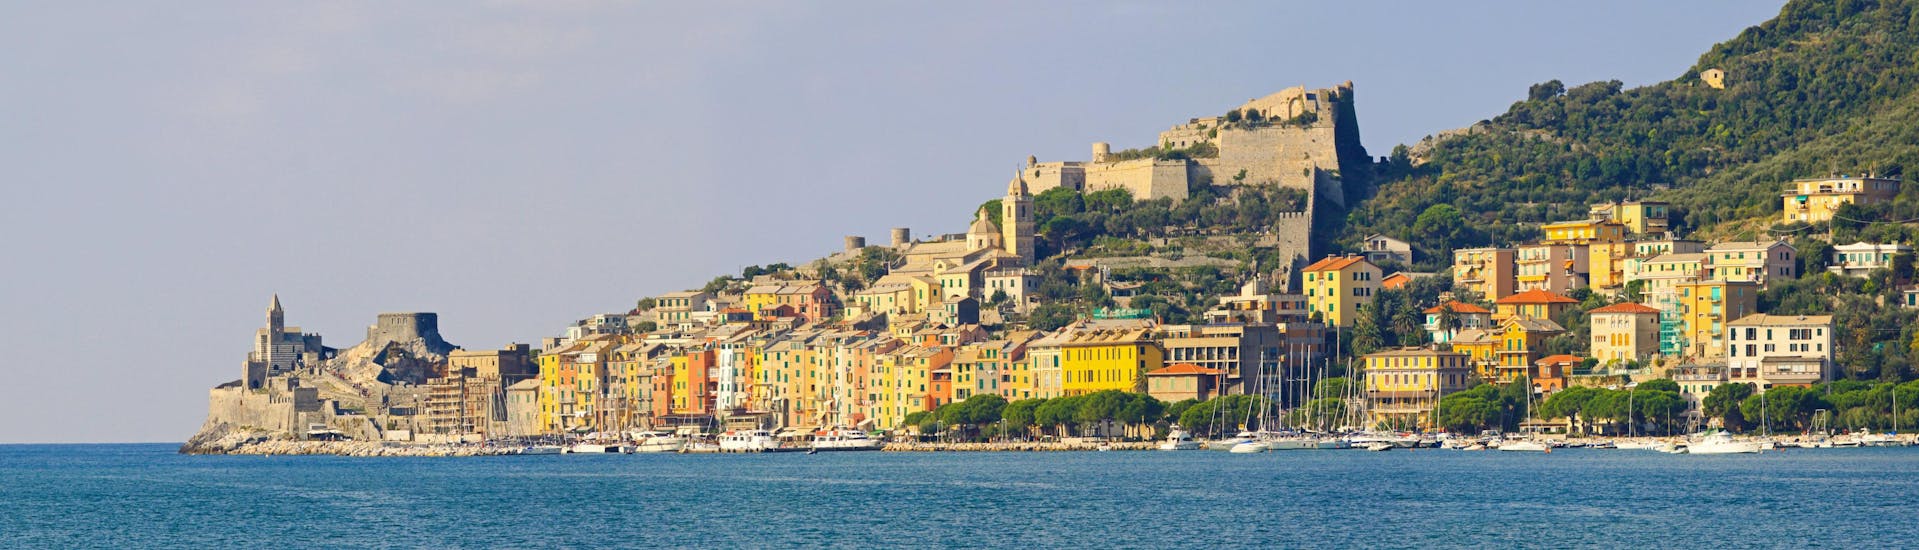 View of the pier of Porto Venere, Italy, a popular destination for boat trips.